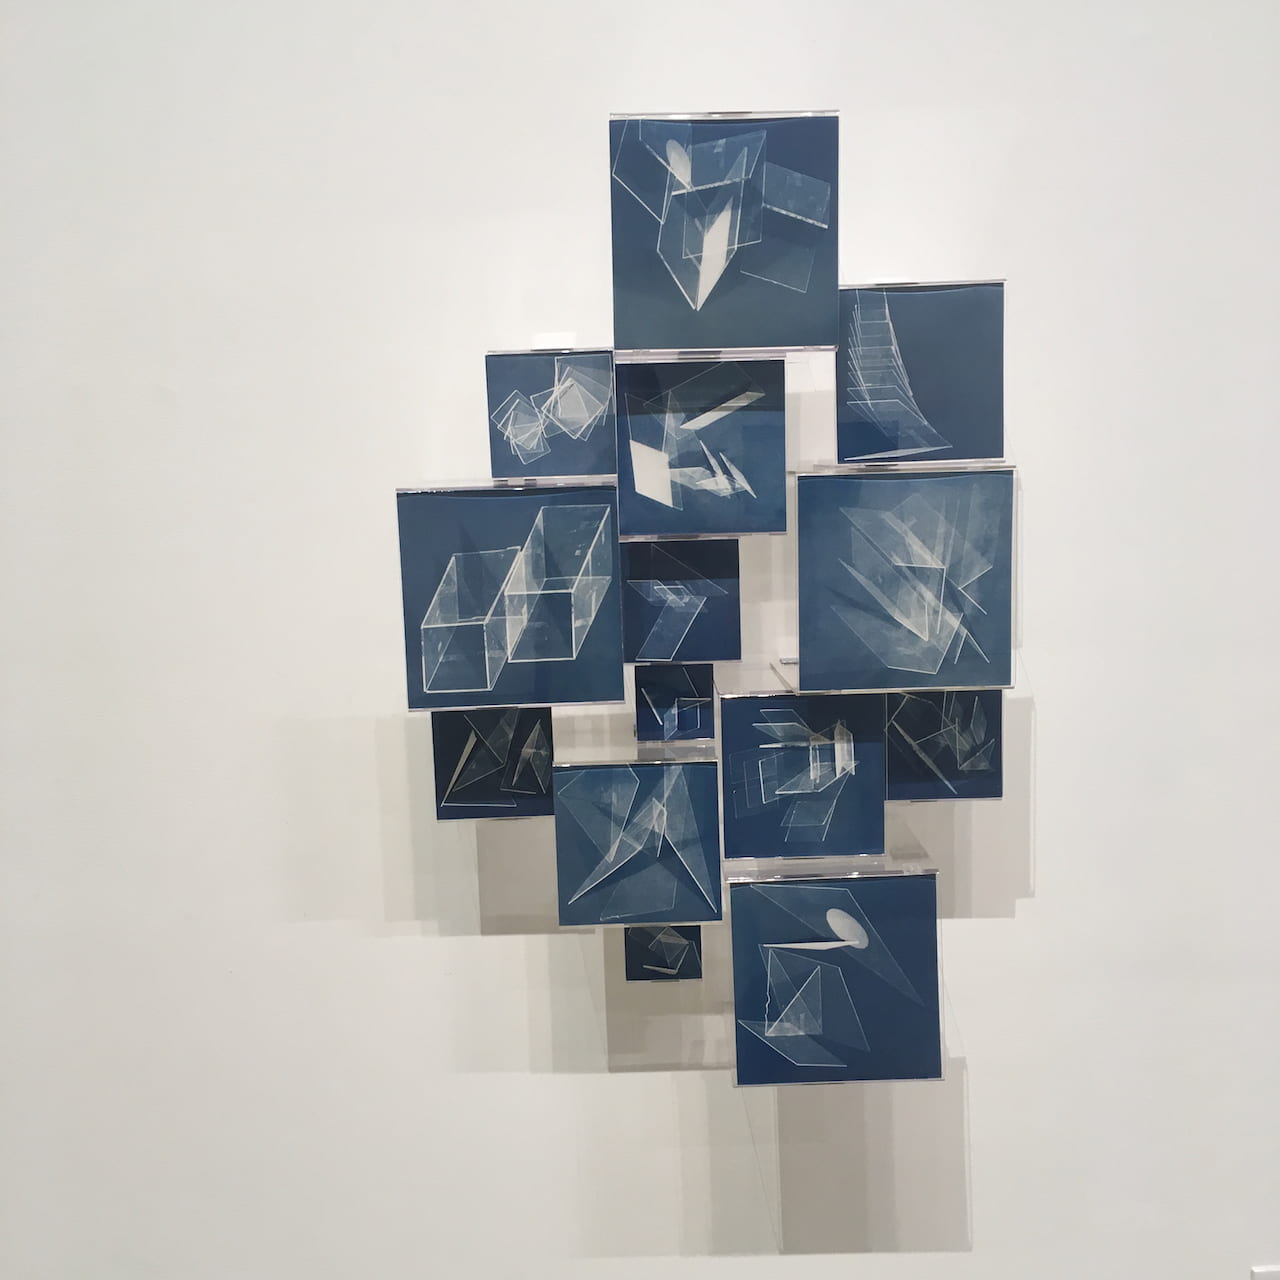 Shadows, Reflections and Remnants, 2019, by Charis Barnes. Cyanotype on paper and acrylic boxes, 40"x32"x10"